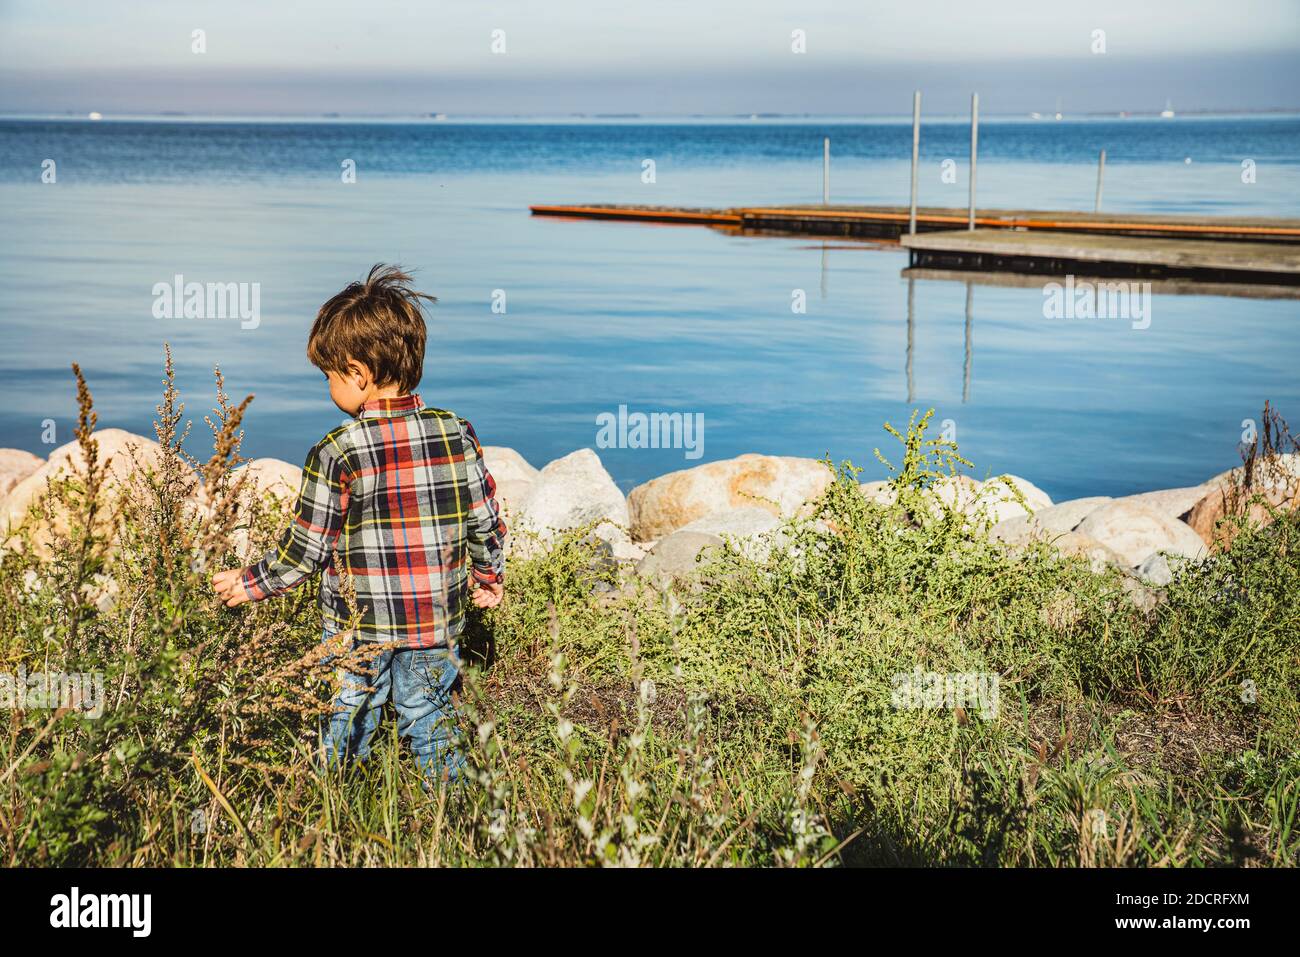 A child, kid or toddler at the seaside bears childhood and discovers the beauty of nature gaining eagerness, learning life and feeding his curiosity Stock Photo